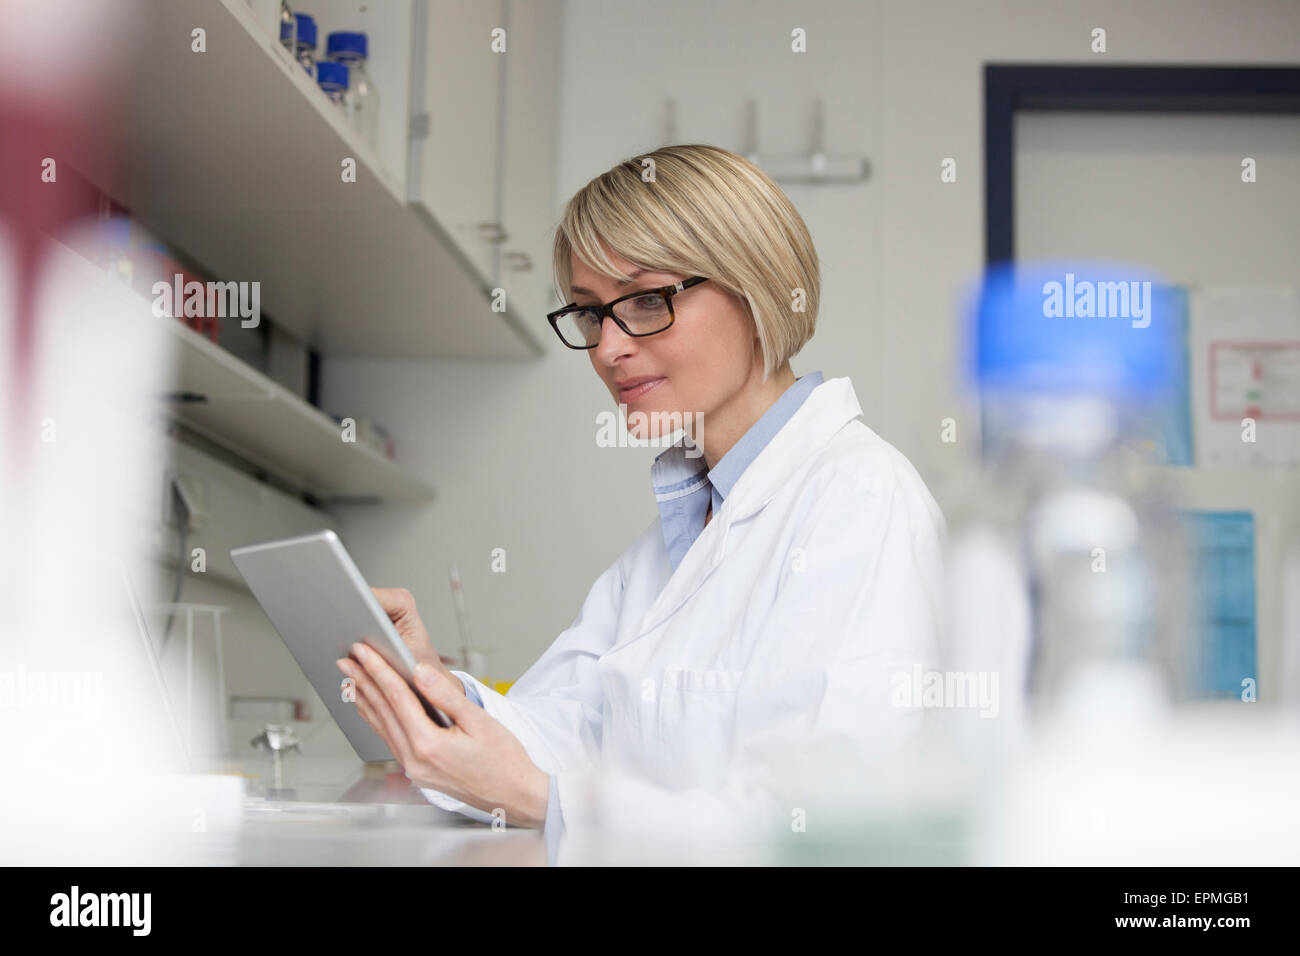 Scientist using digital tablet in laboratory Banque D'Images